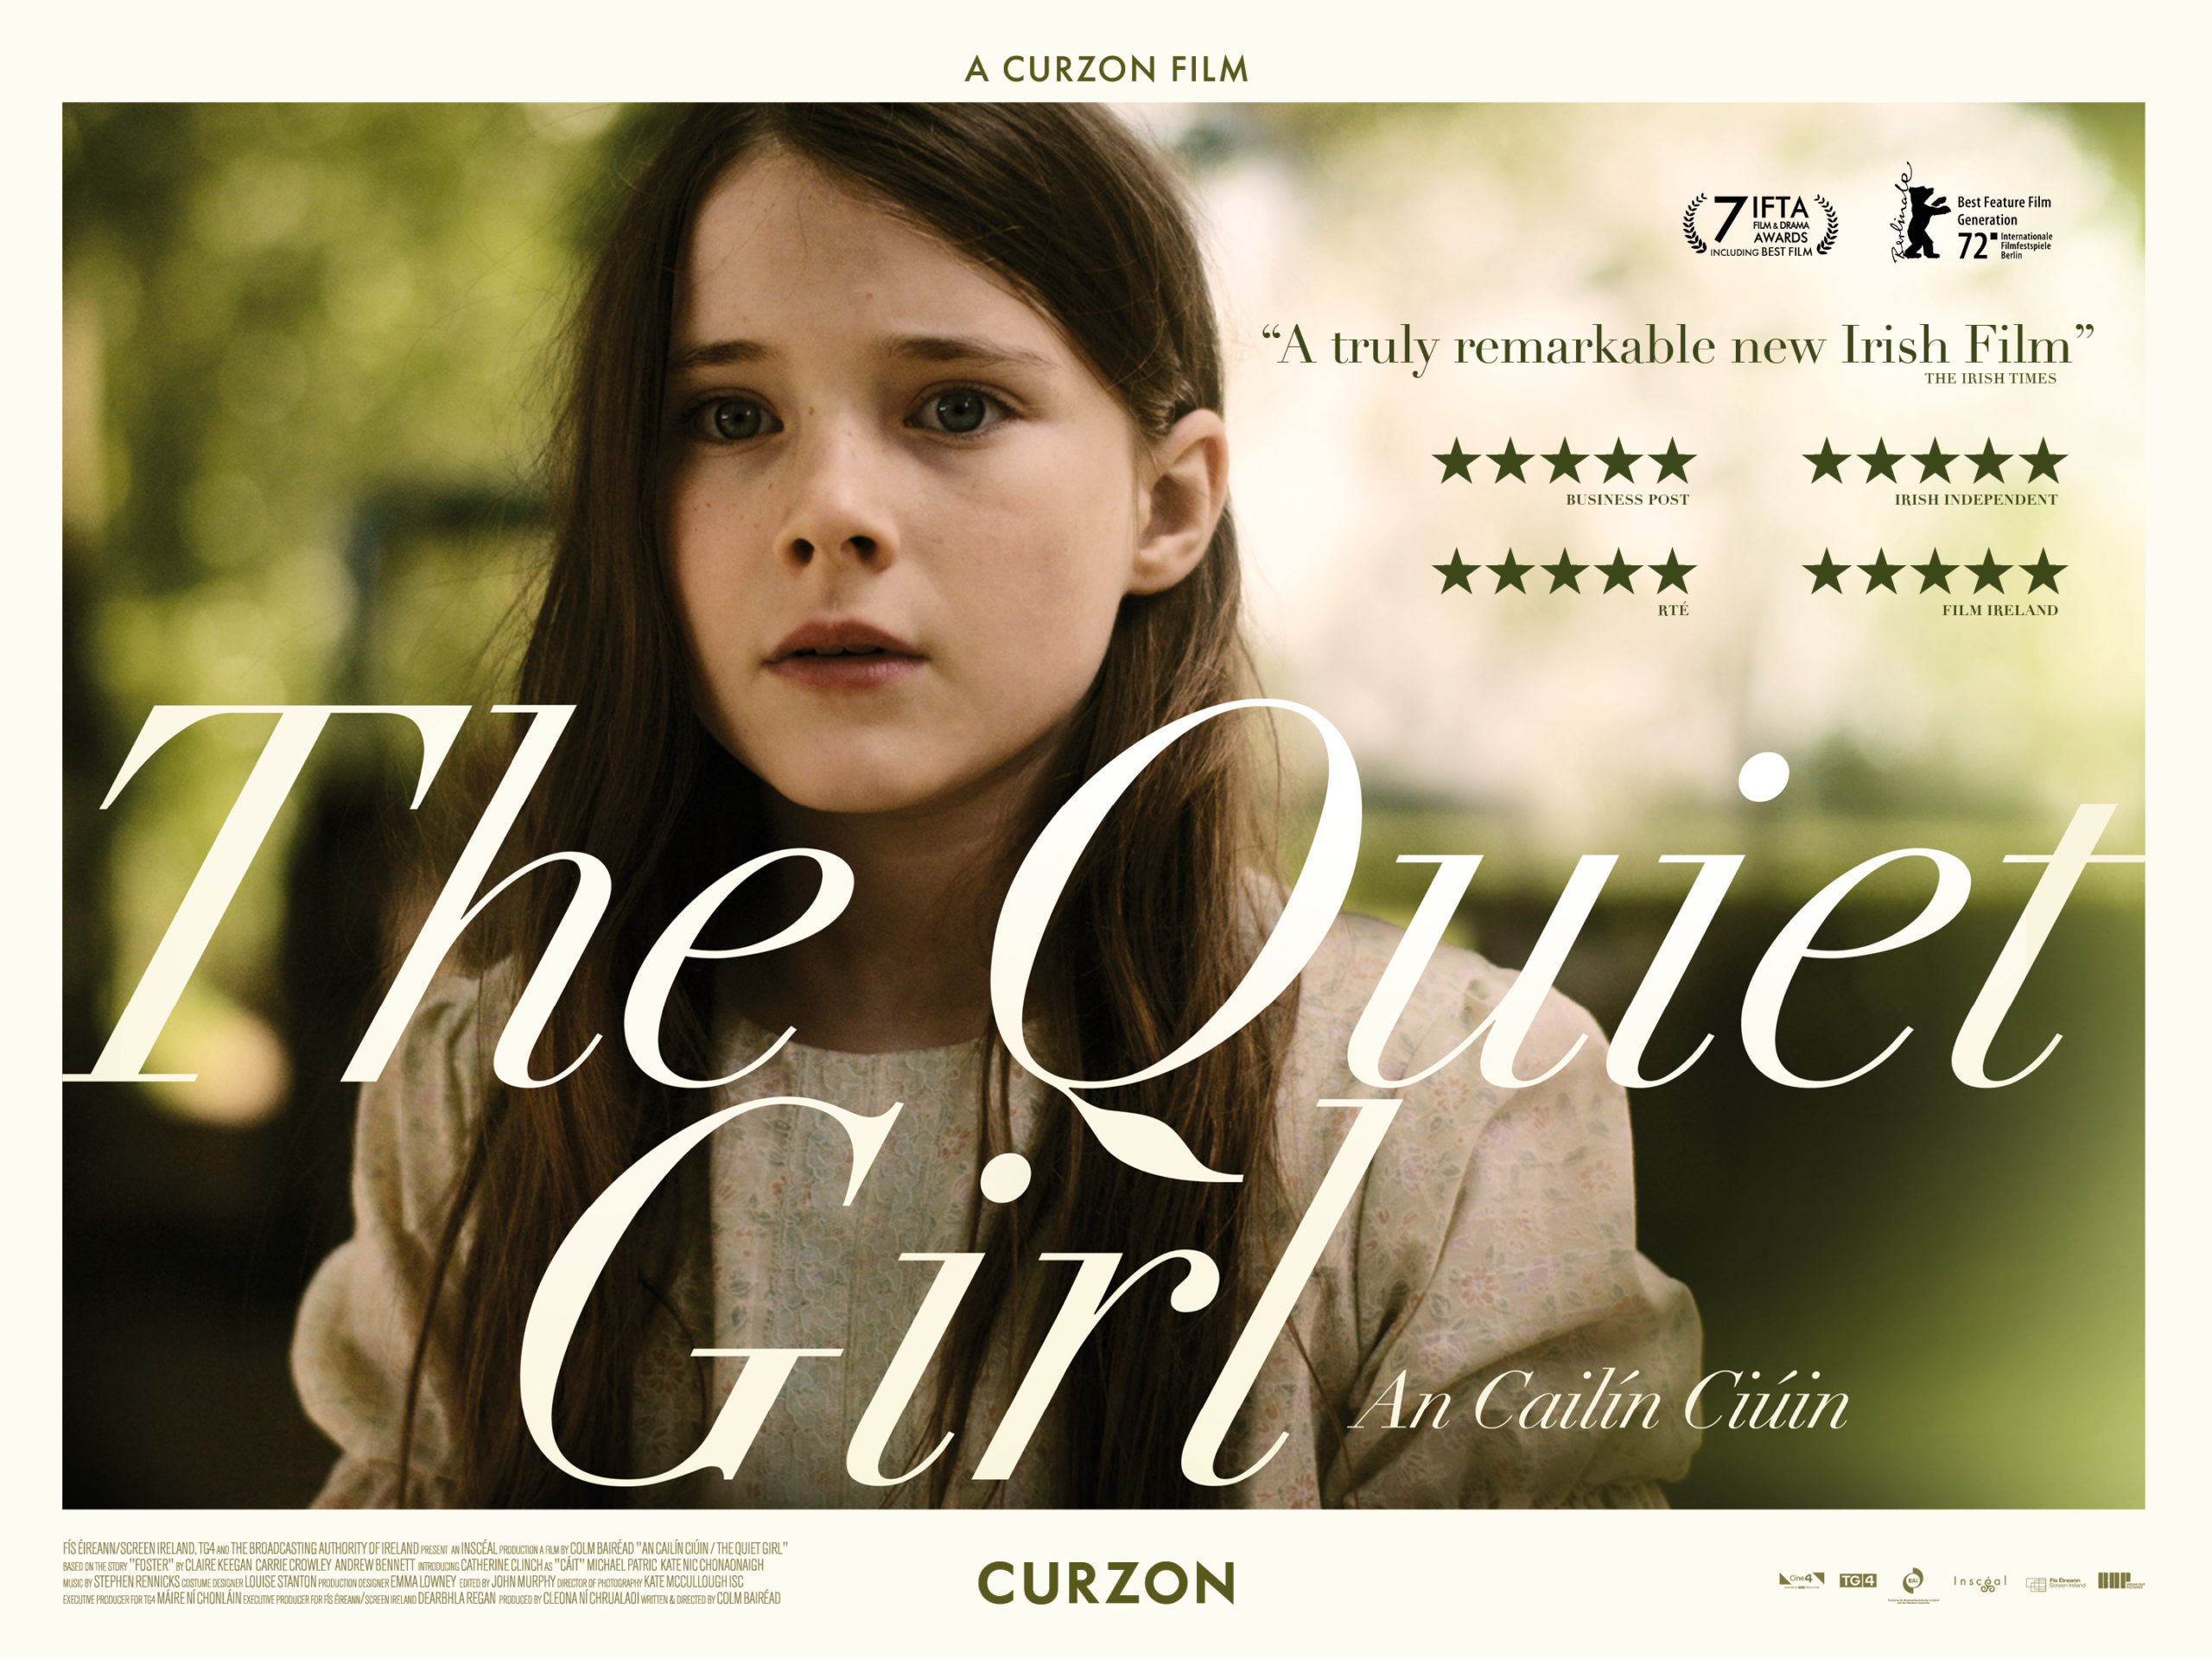 book review the quiet girl